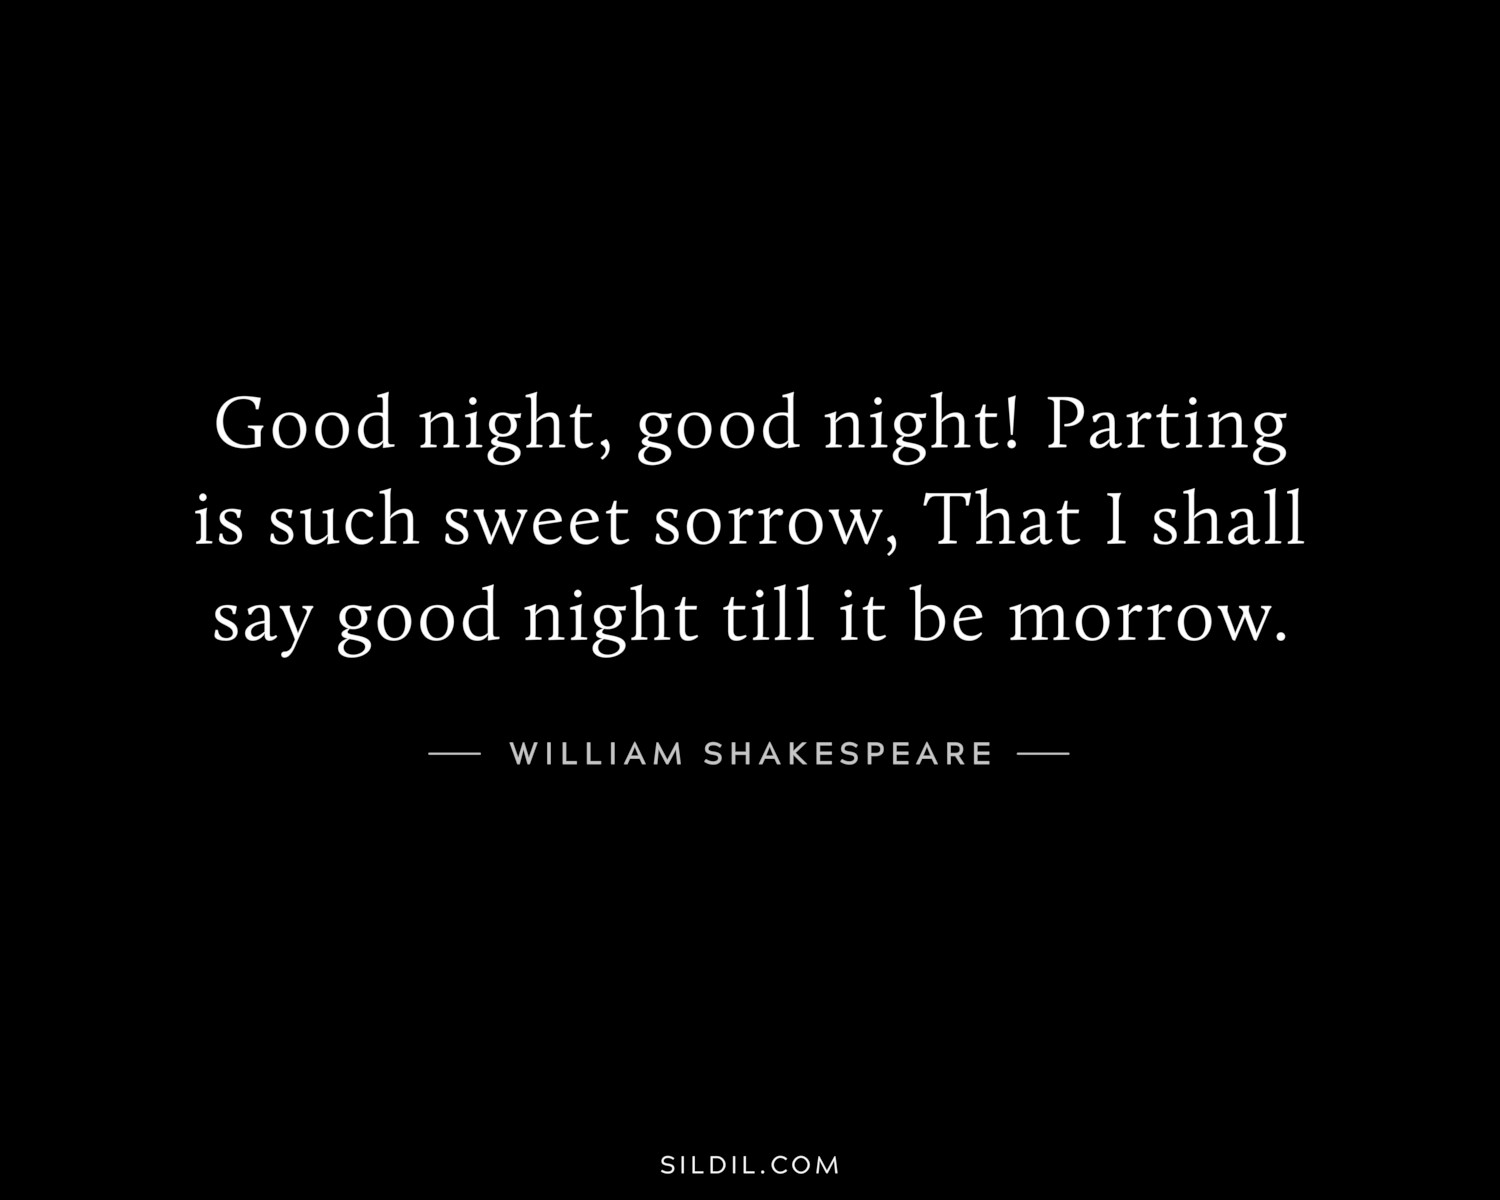 Good night, good night! Parting is such sweet sorrow, That I shall say good night till it be morrow.